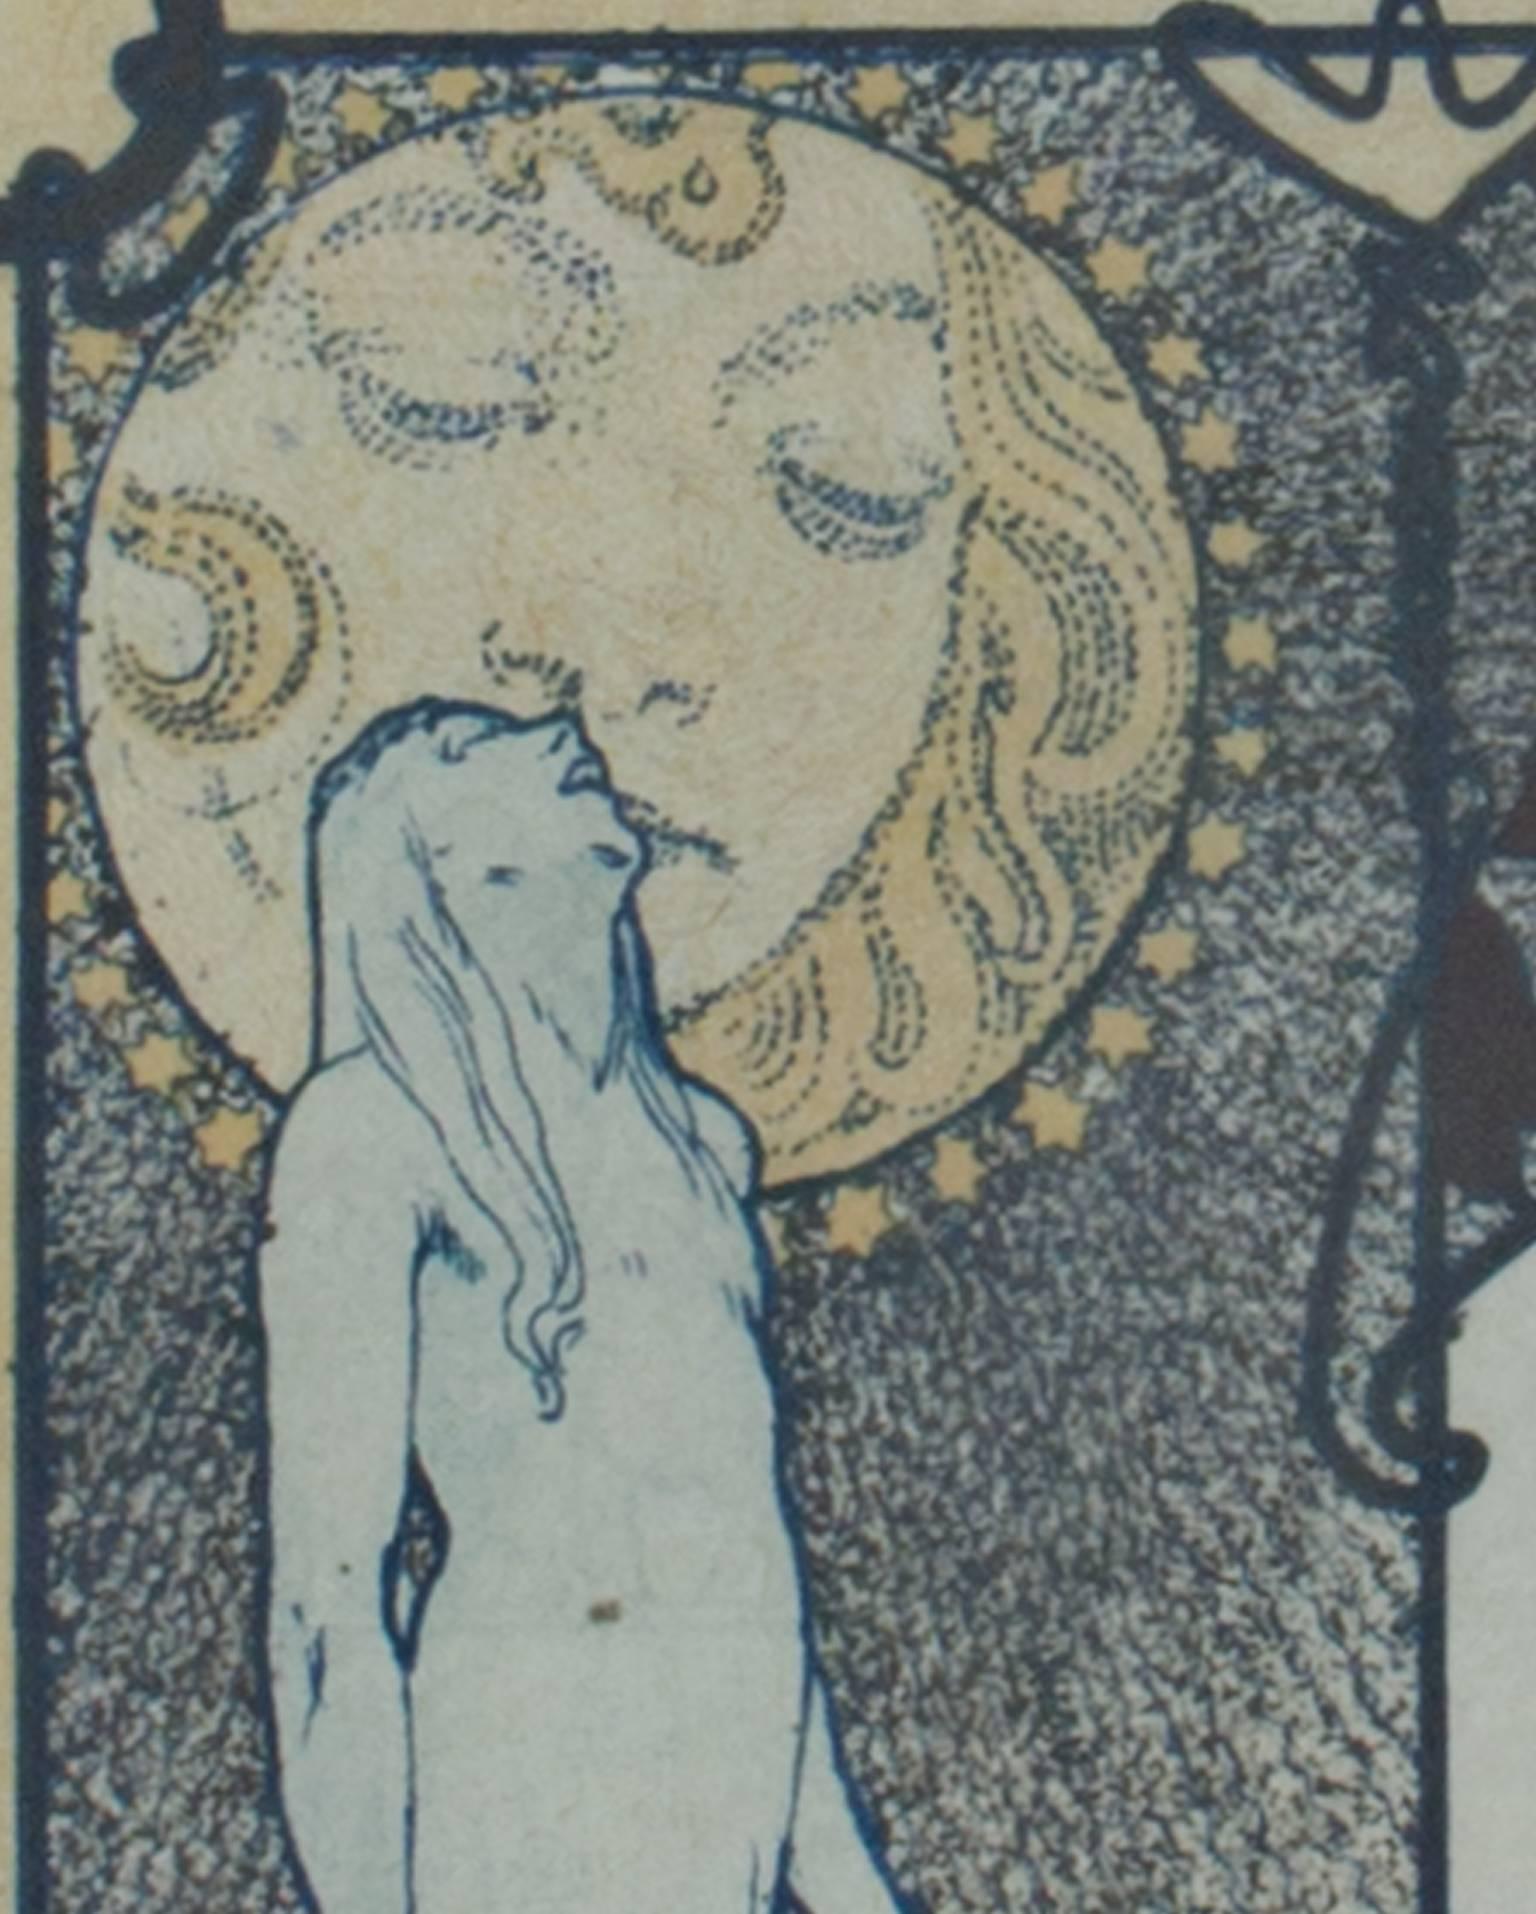 In 1897, Alphonse Mucha created illustrations for 